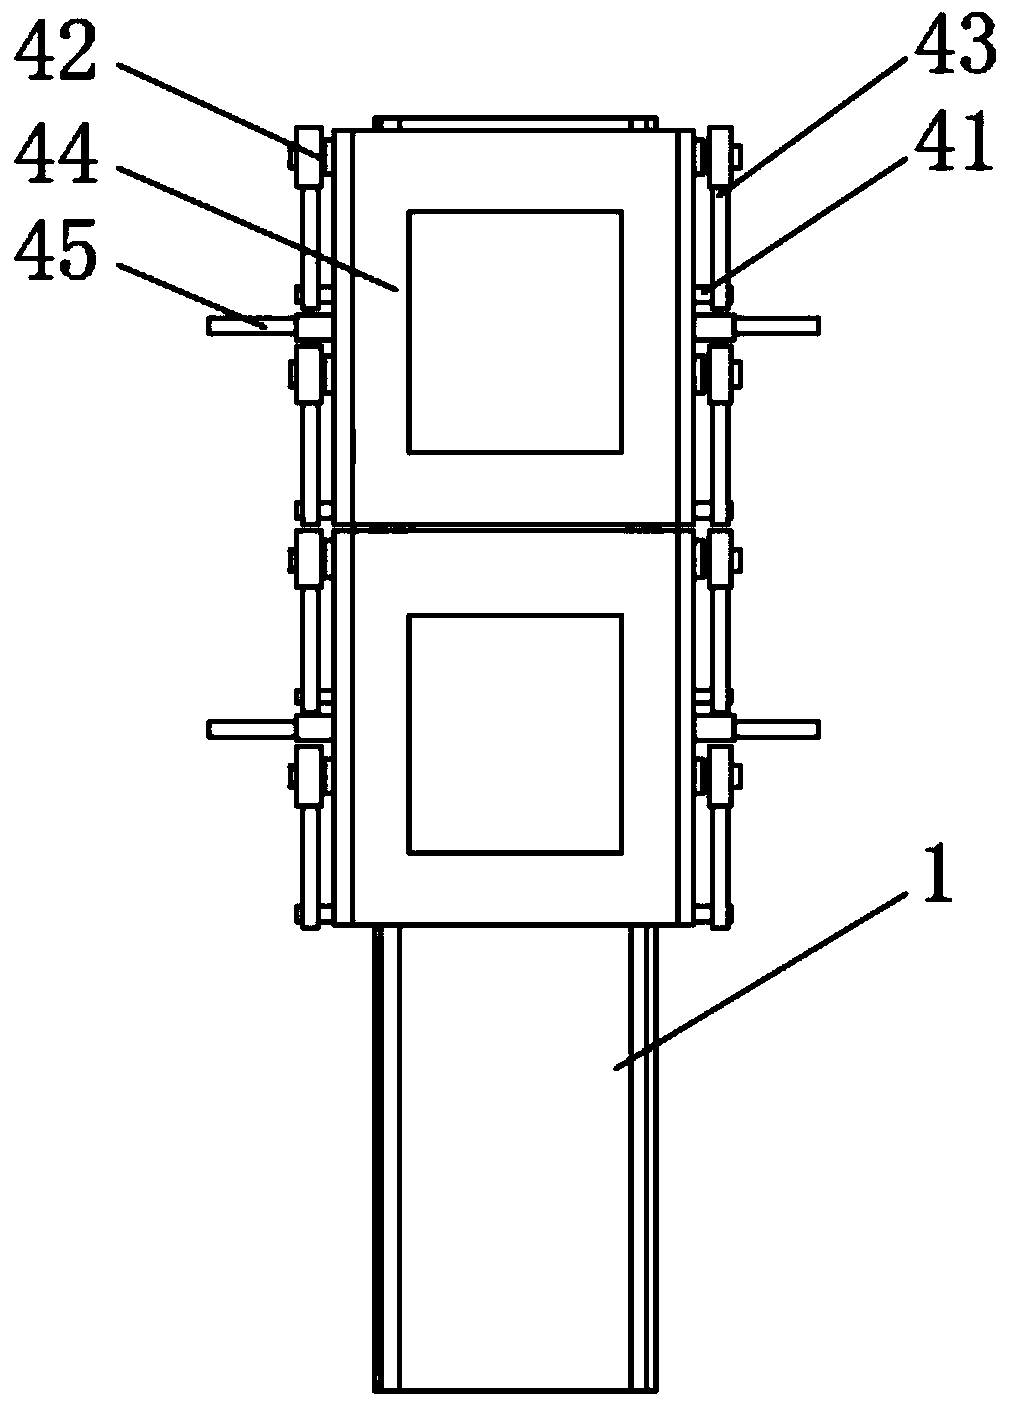 Positioning device for welding semiconductor parts